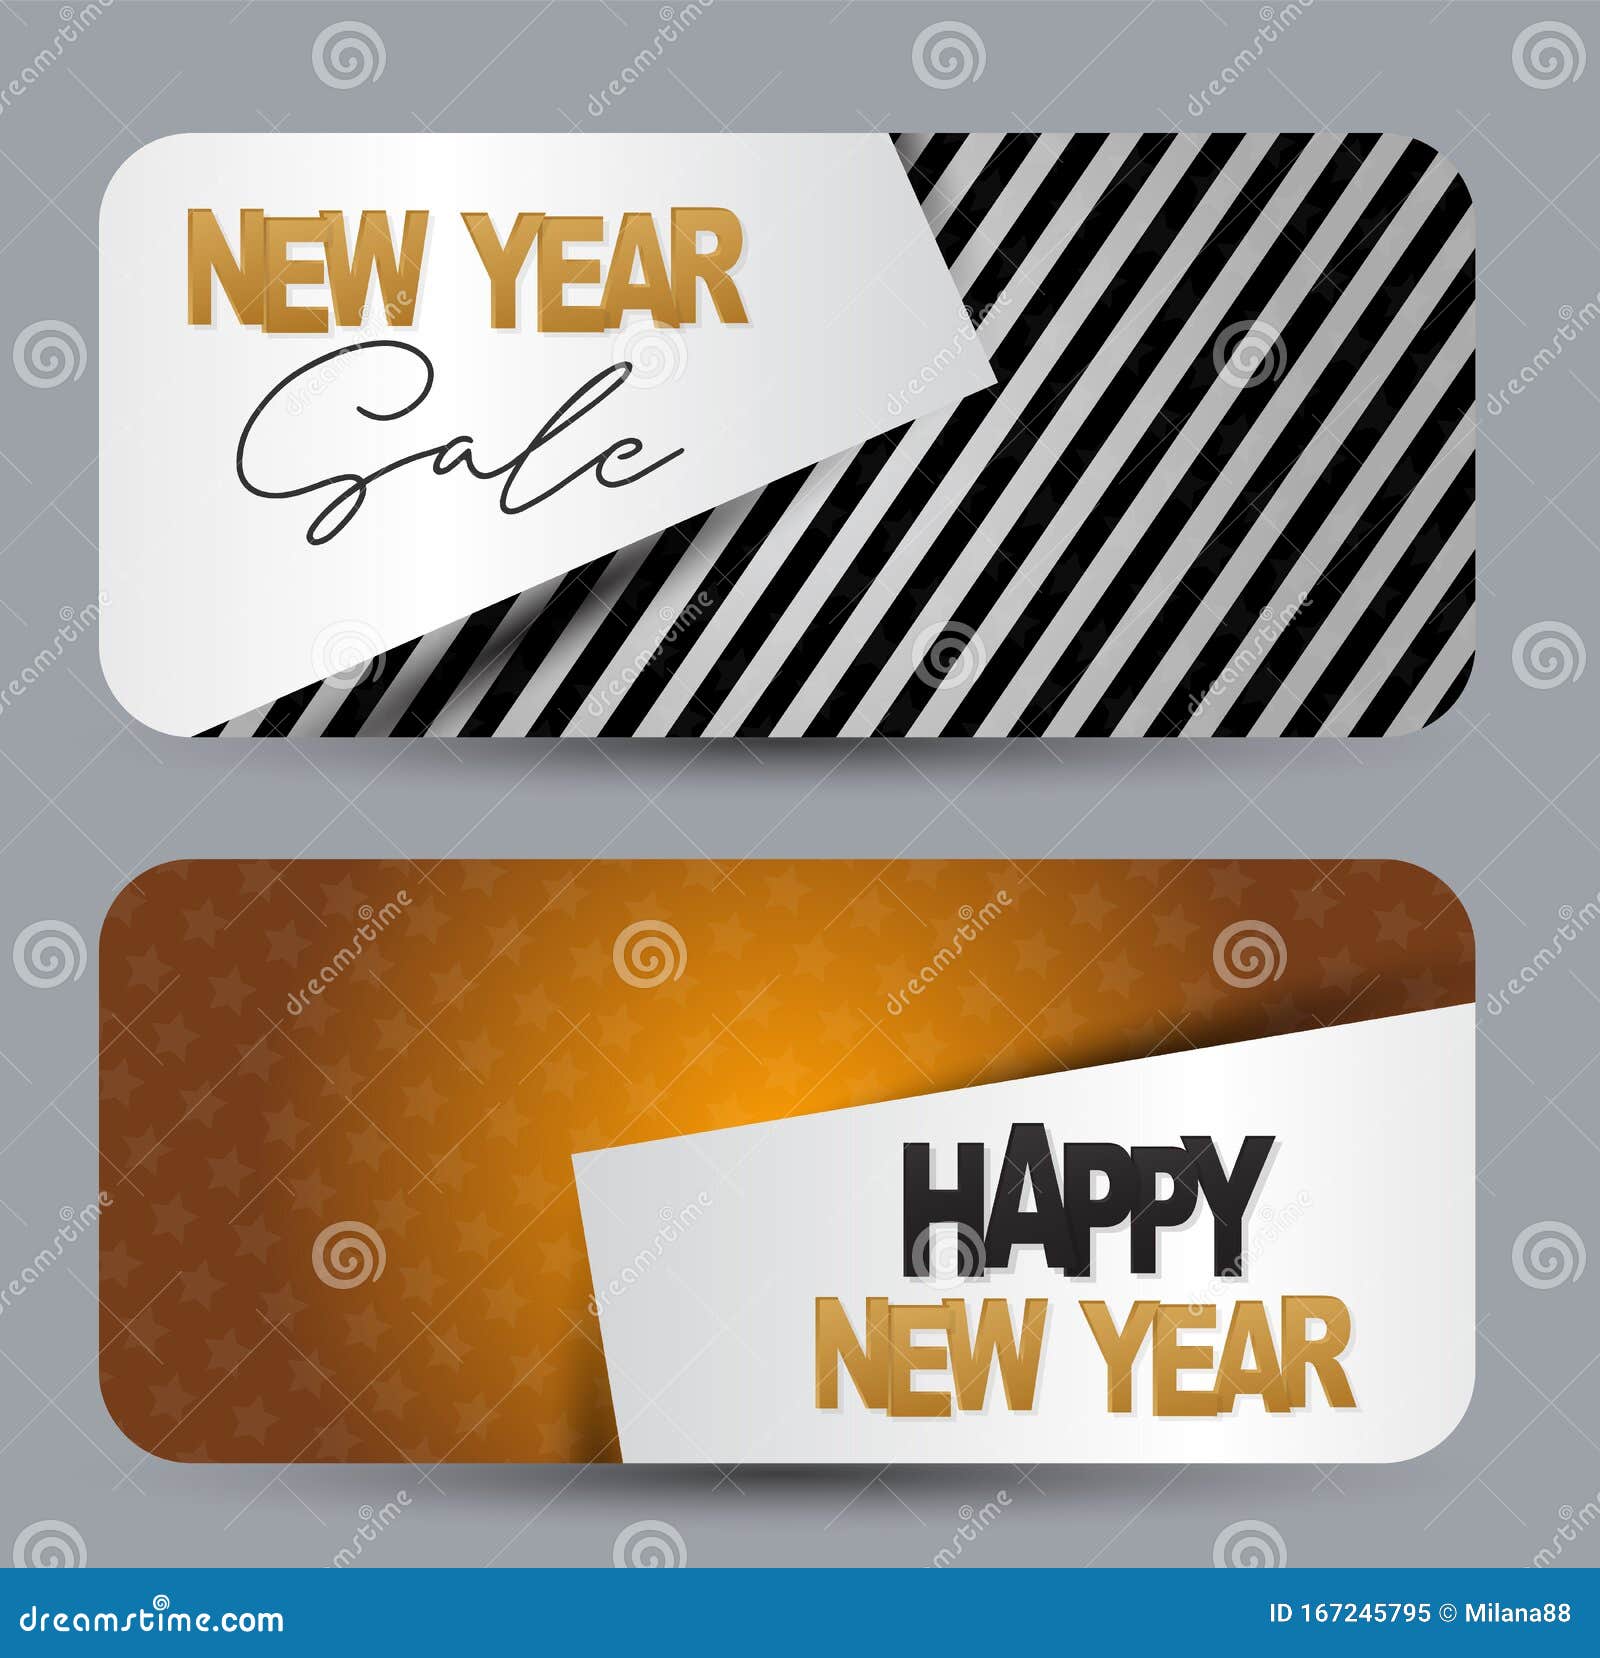 Happy New Year Design Concept. Gift Card Or Voucher. Black